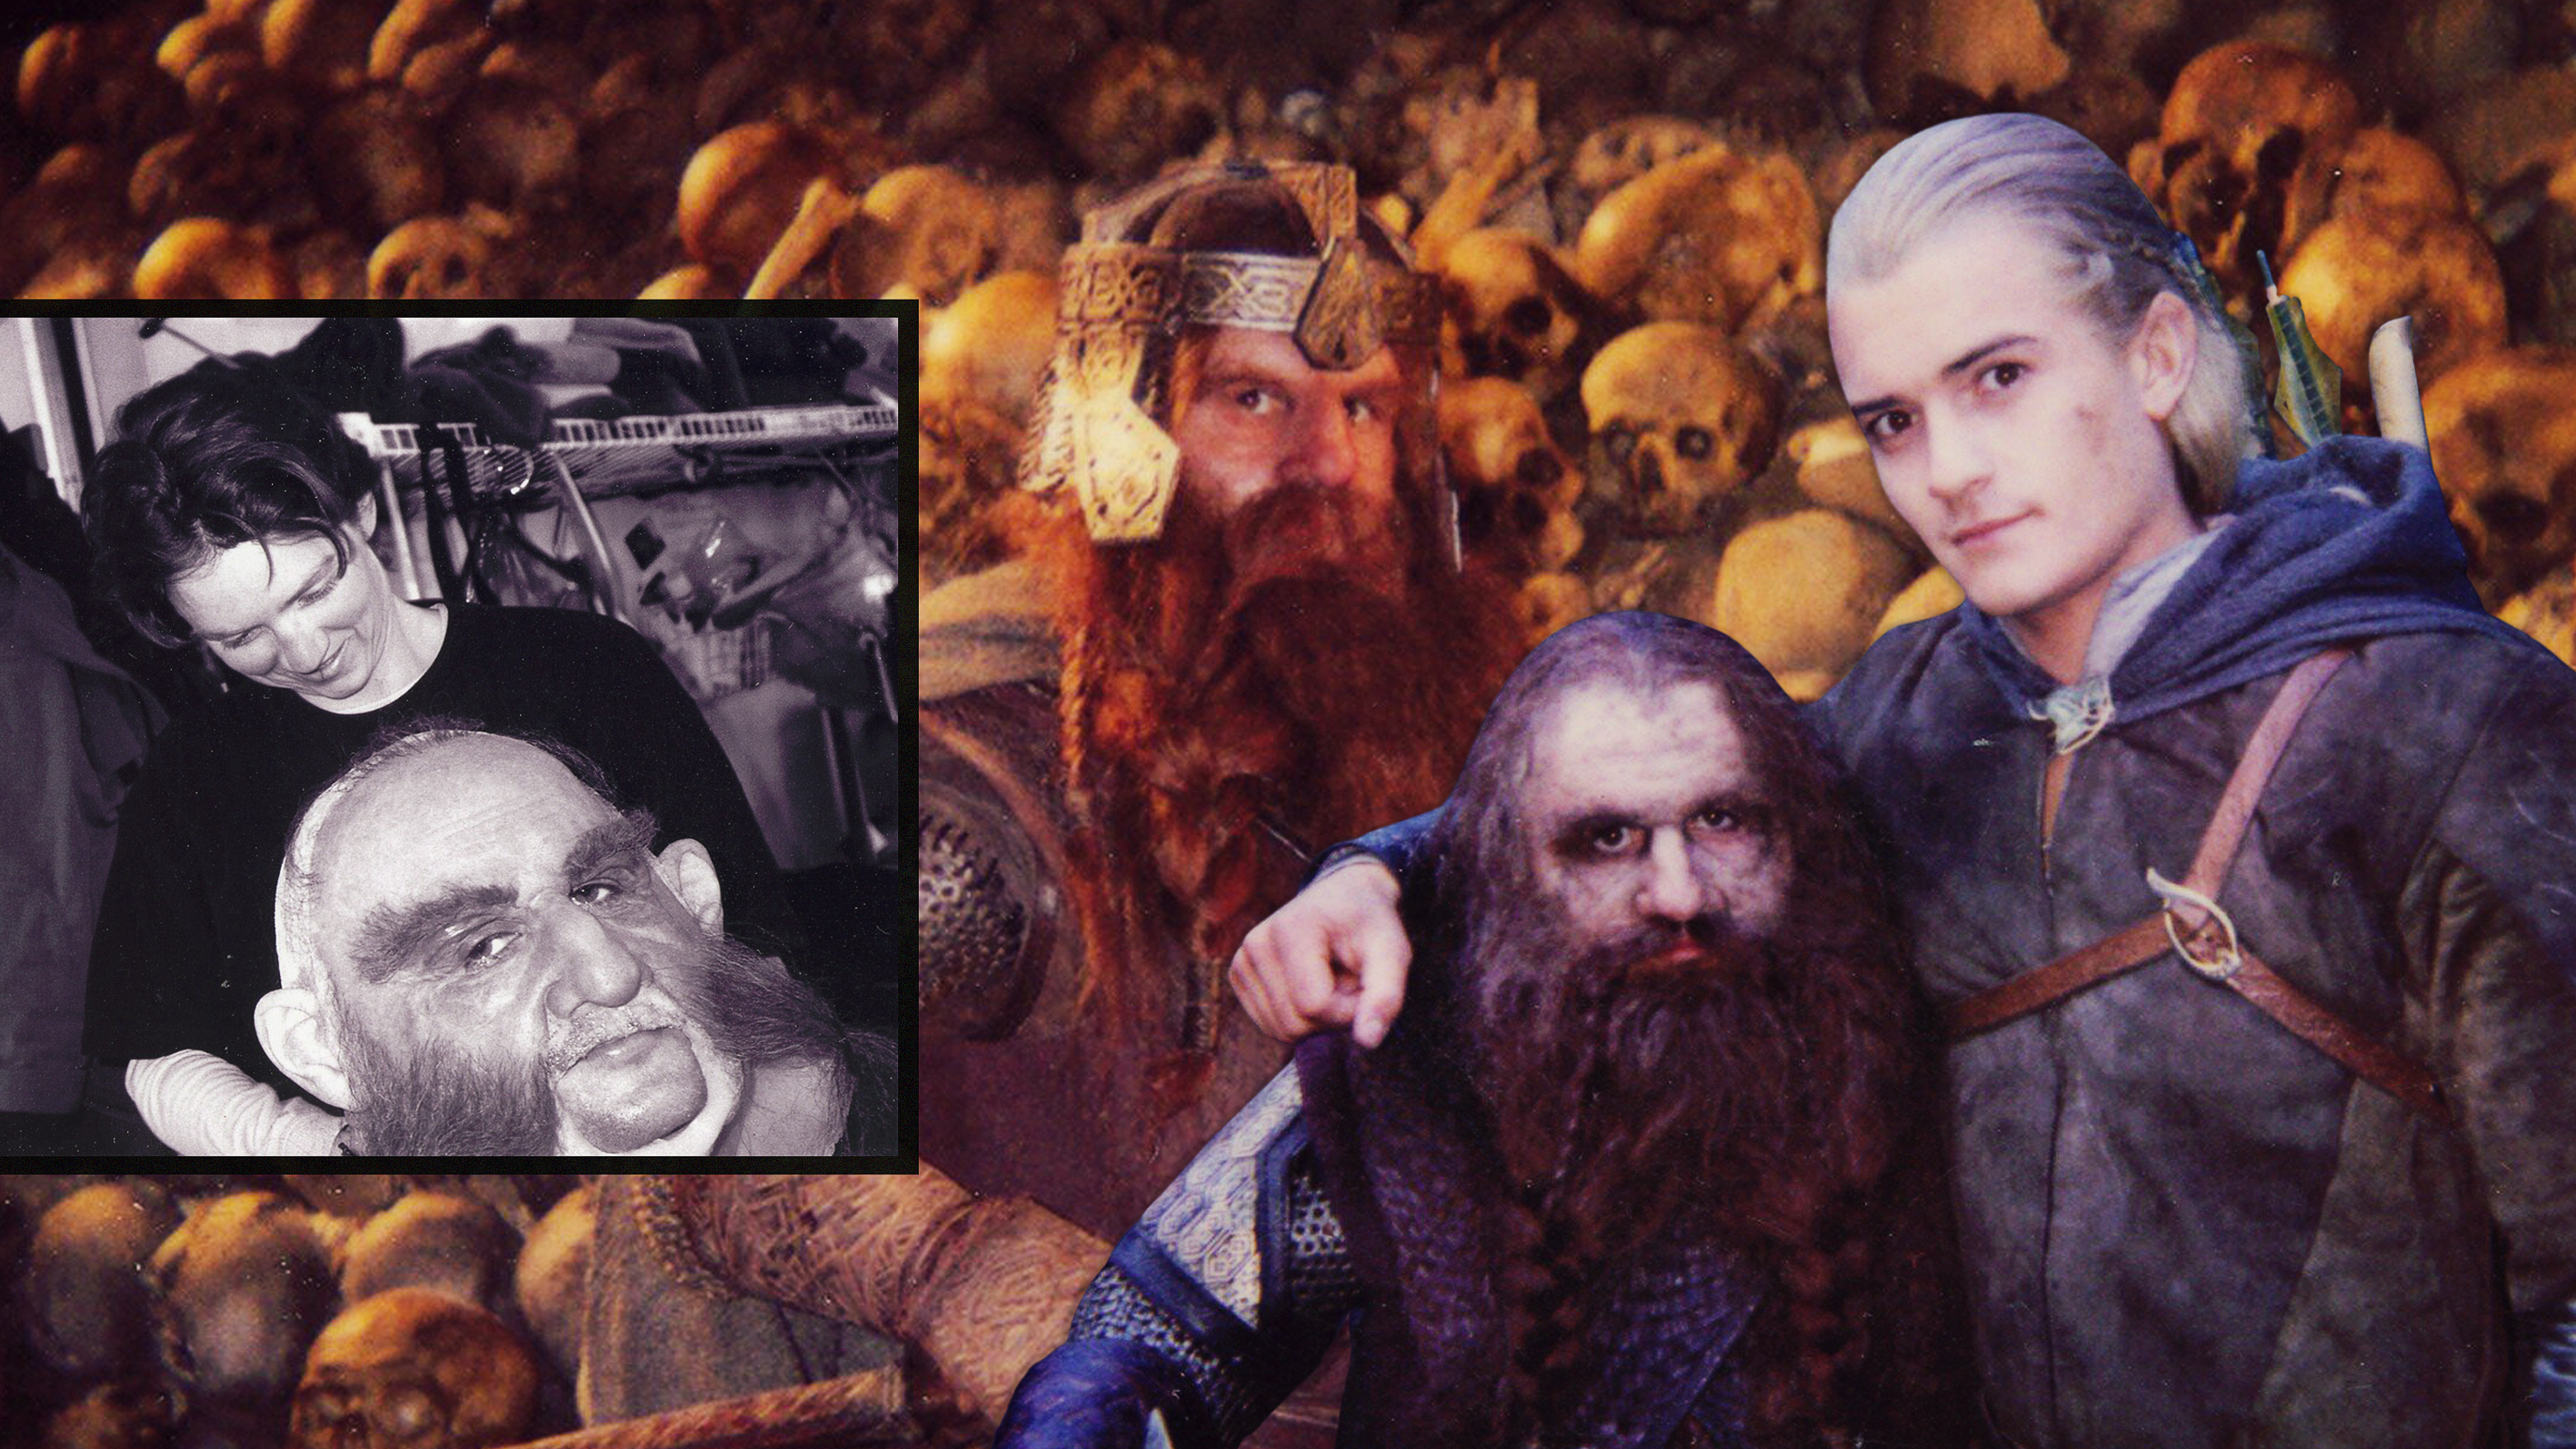 A collection of images of Gimli the Dwarf’s stunt double in The Lord of the Rings movies